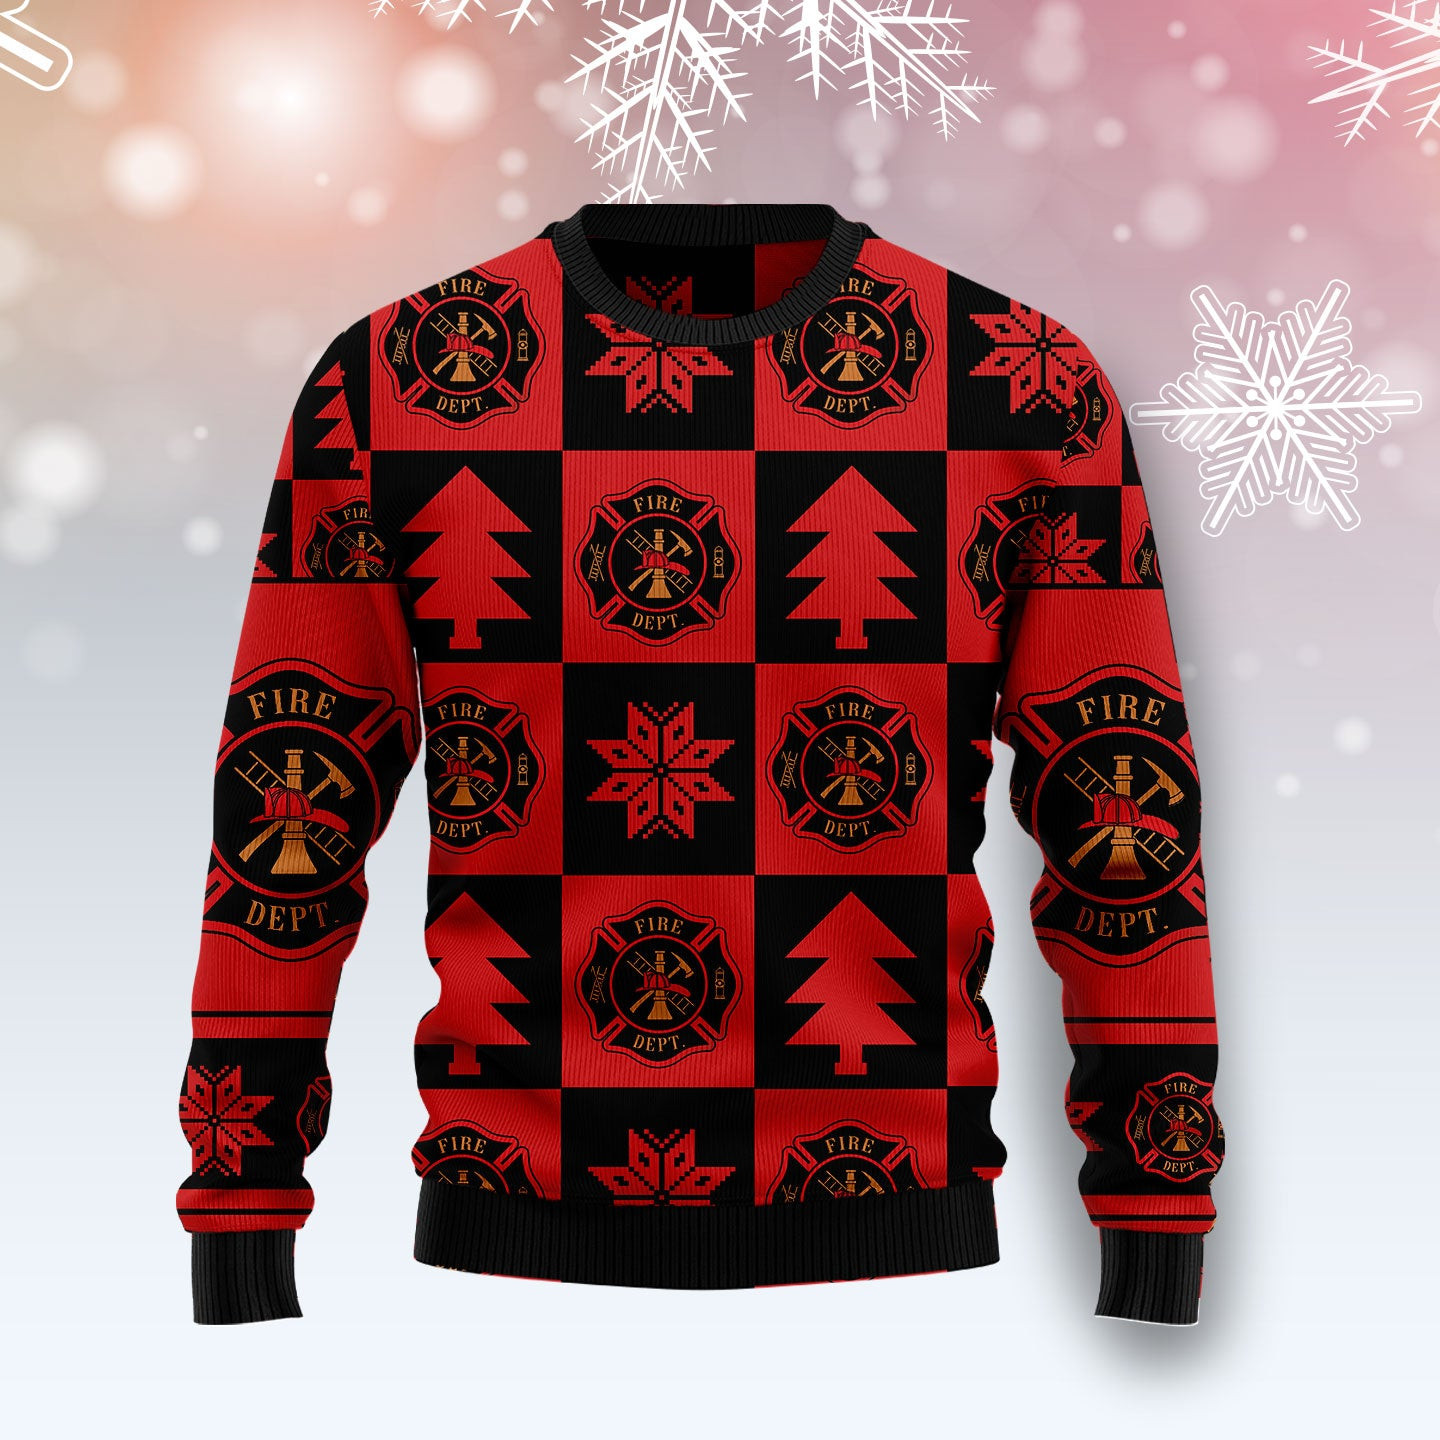 Firefighter Christmas Pattern Ugly Christmas Sweater, Ugly Sweater For Men Women, Holiday Sweater